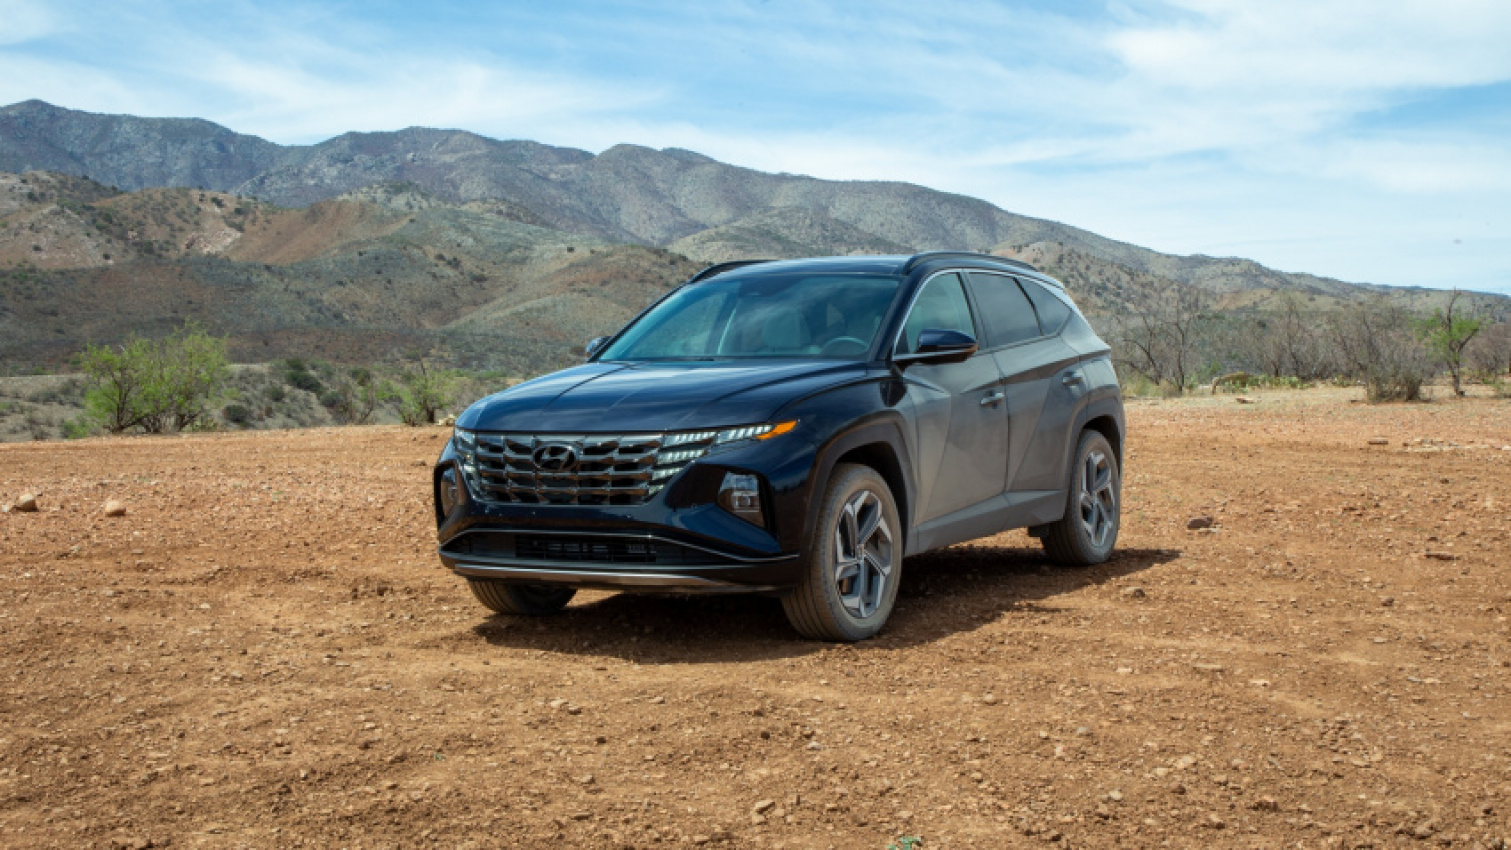 autos, cars, hyundai, android, first drives, hybrids, hyundai news, hyundai tucson, hyundai tucson news, tucson, android, first drive review: 2022 hyundai tucson hybrid superiority extends beyond gas mileage